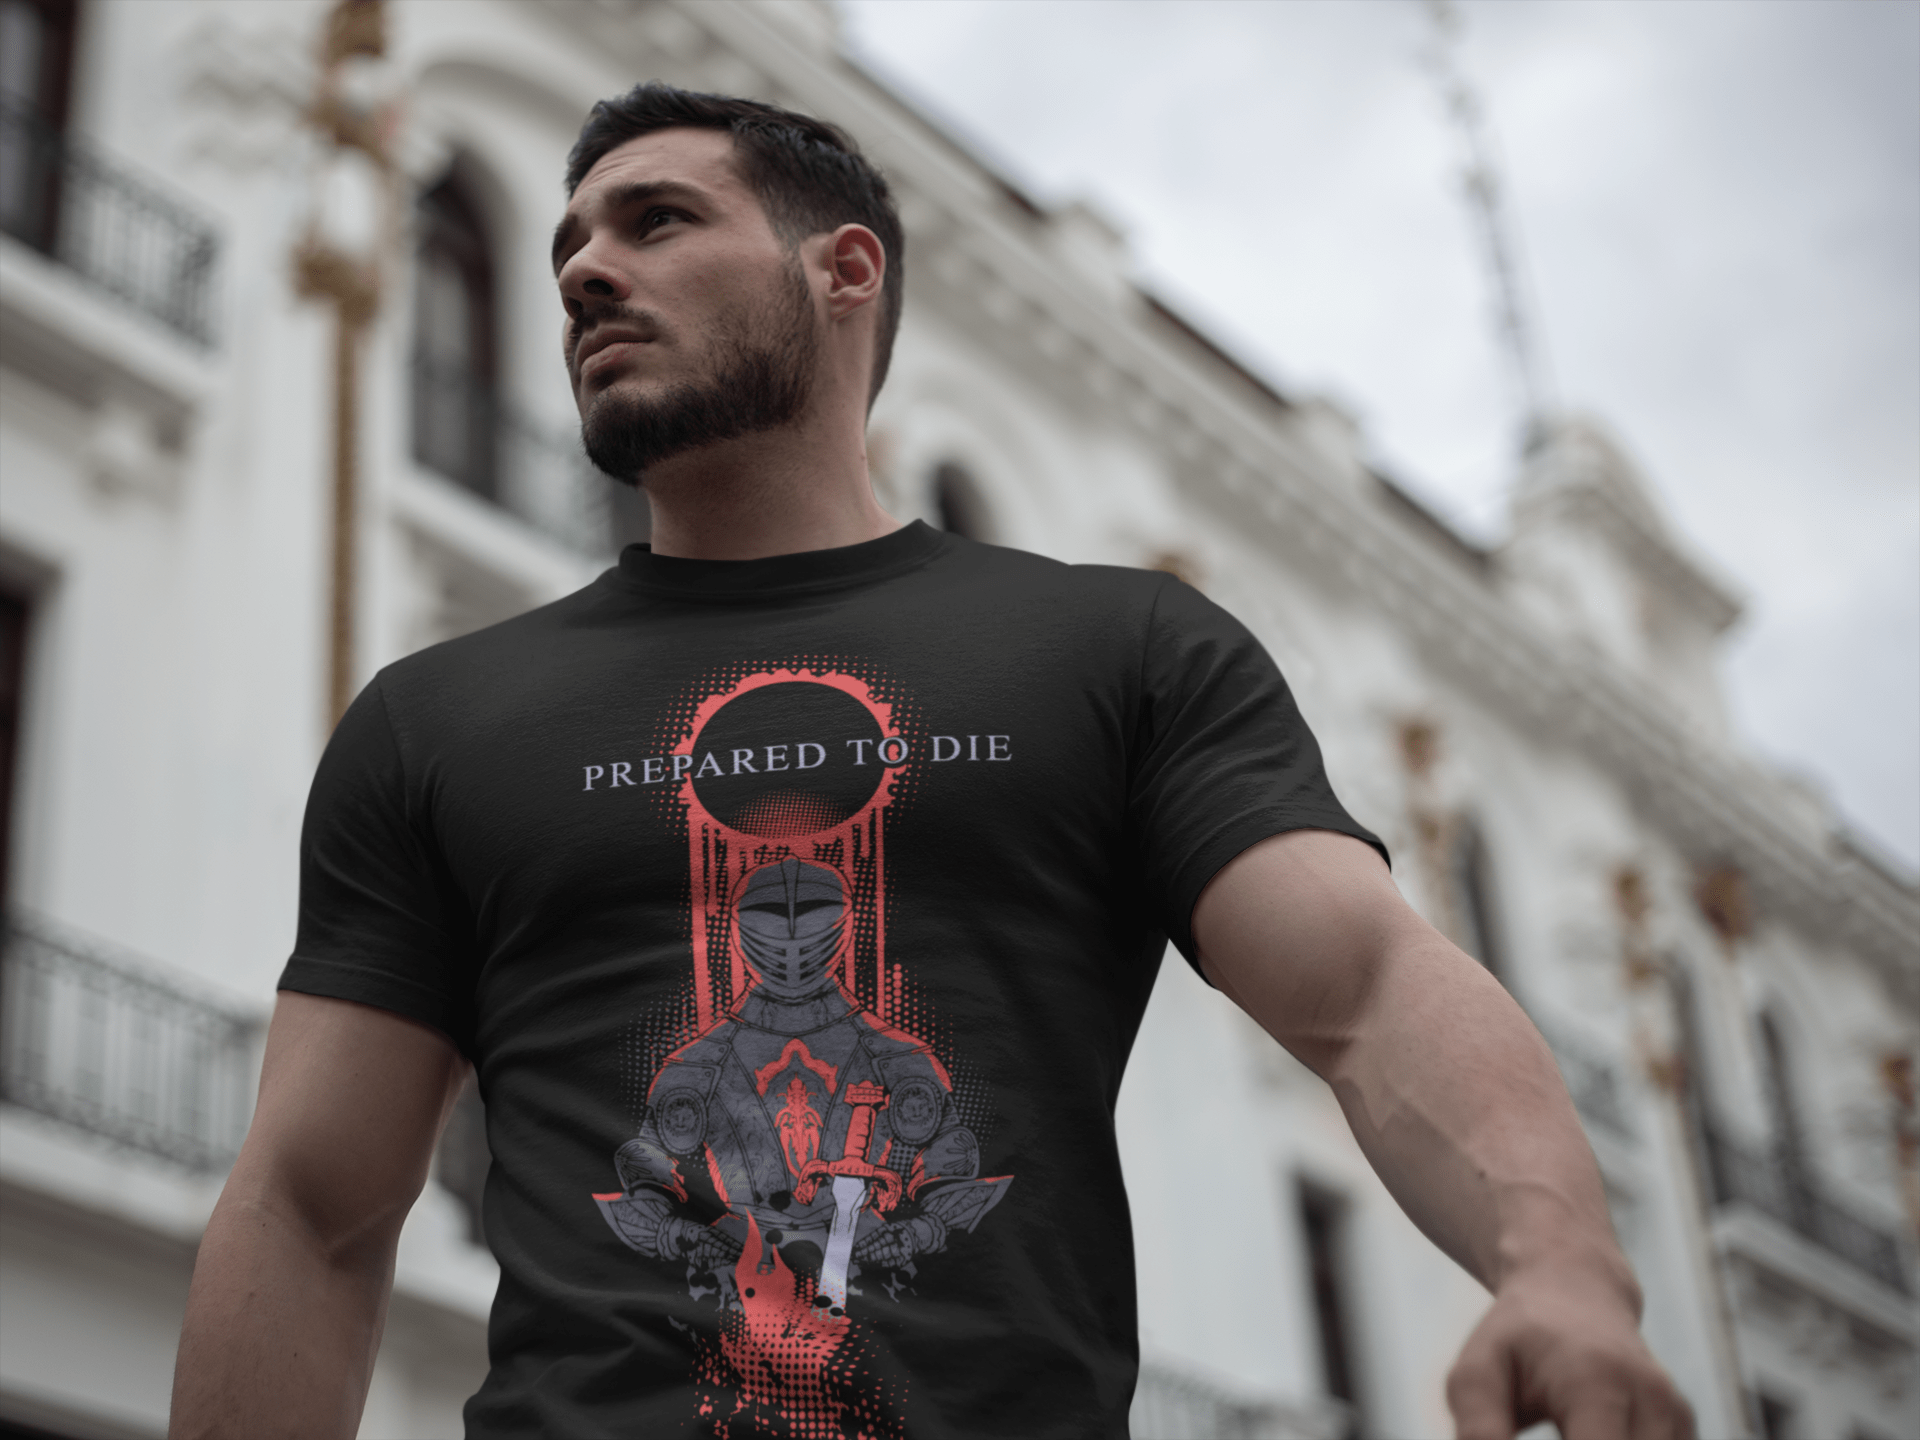 2018 Latest Trends in T-shirt Designs 43